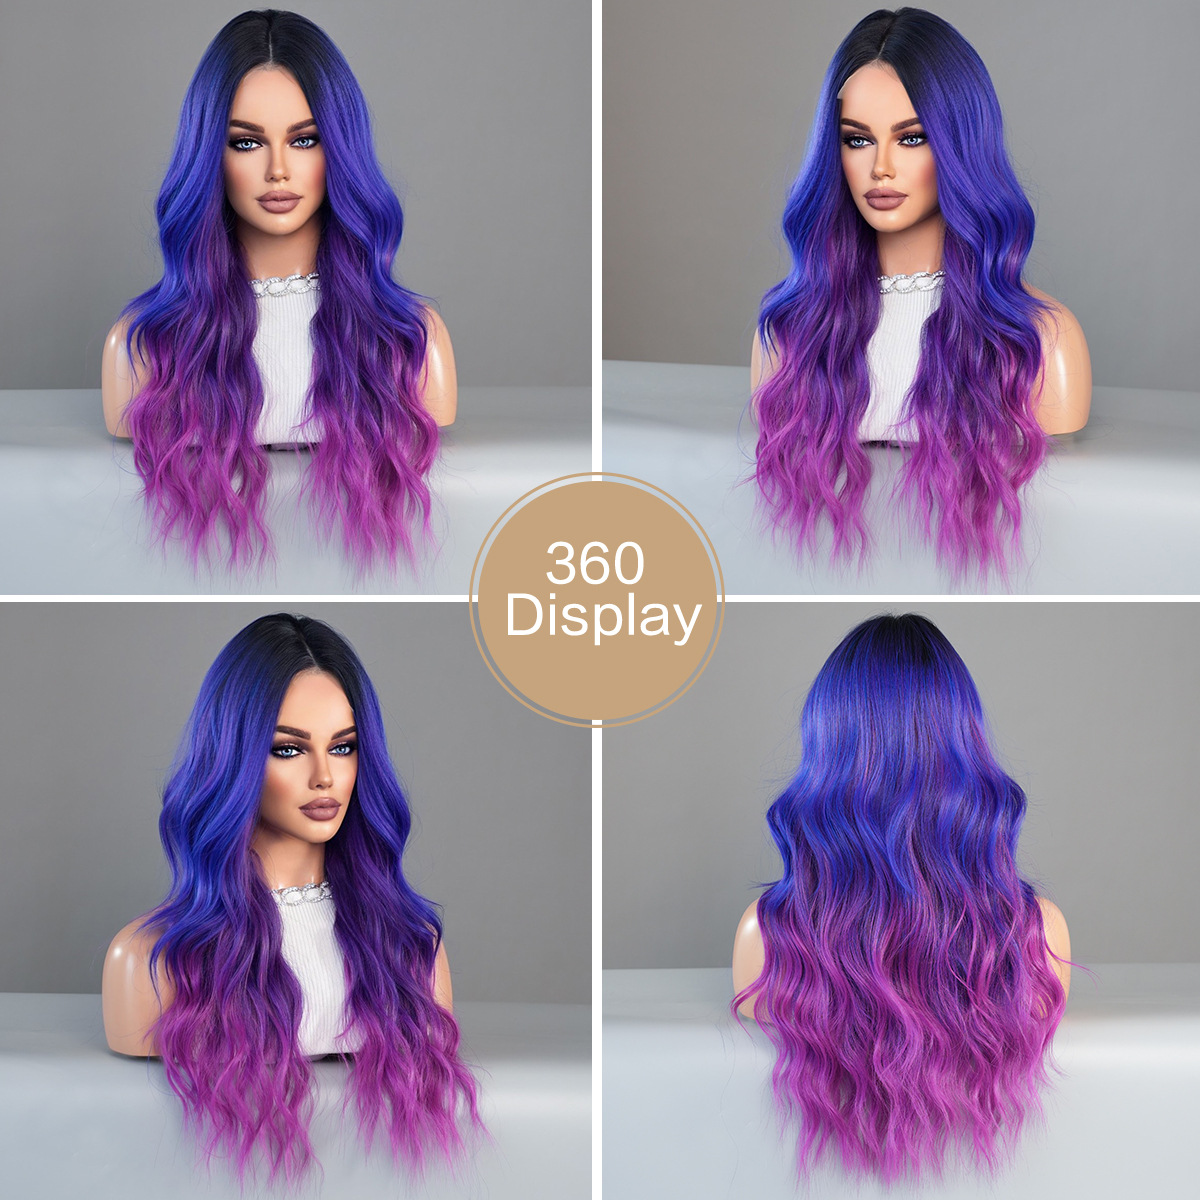 Stylish synthetic wig with small lace, featuring dreamy purple blue gradient and middle-parted waves hair